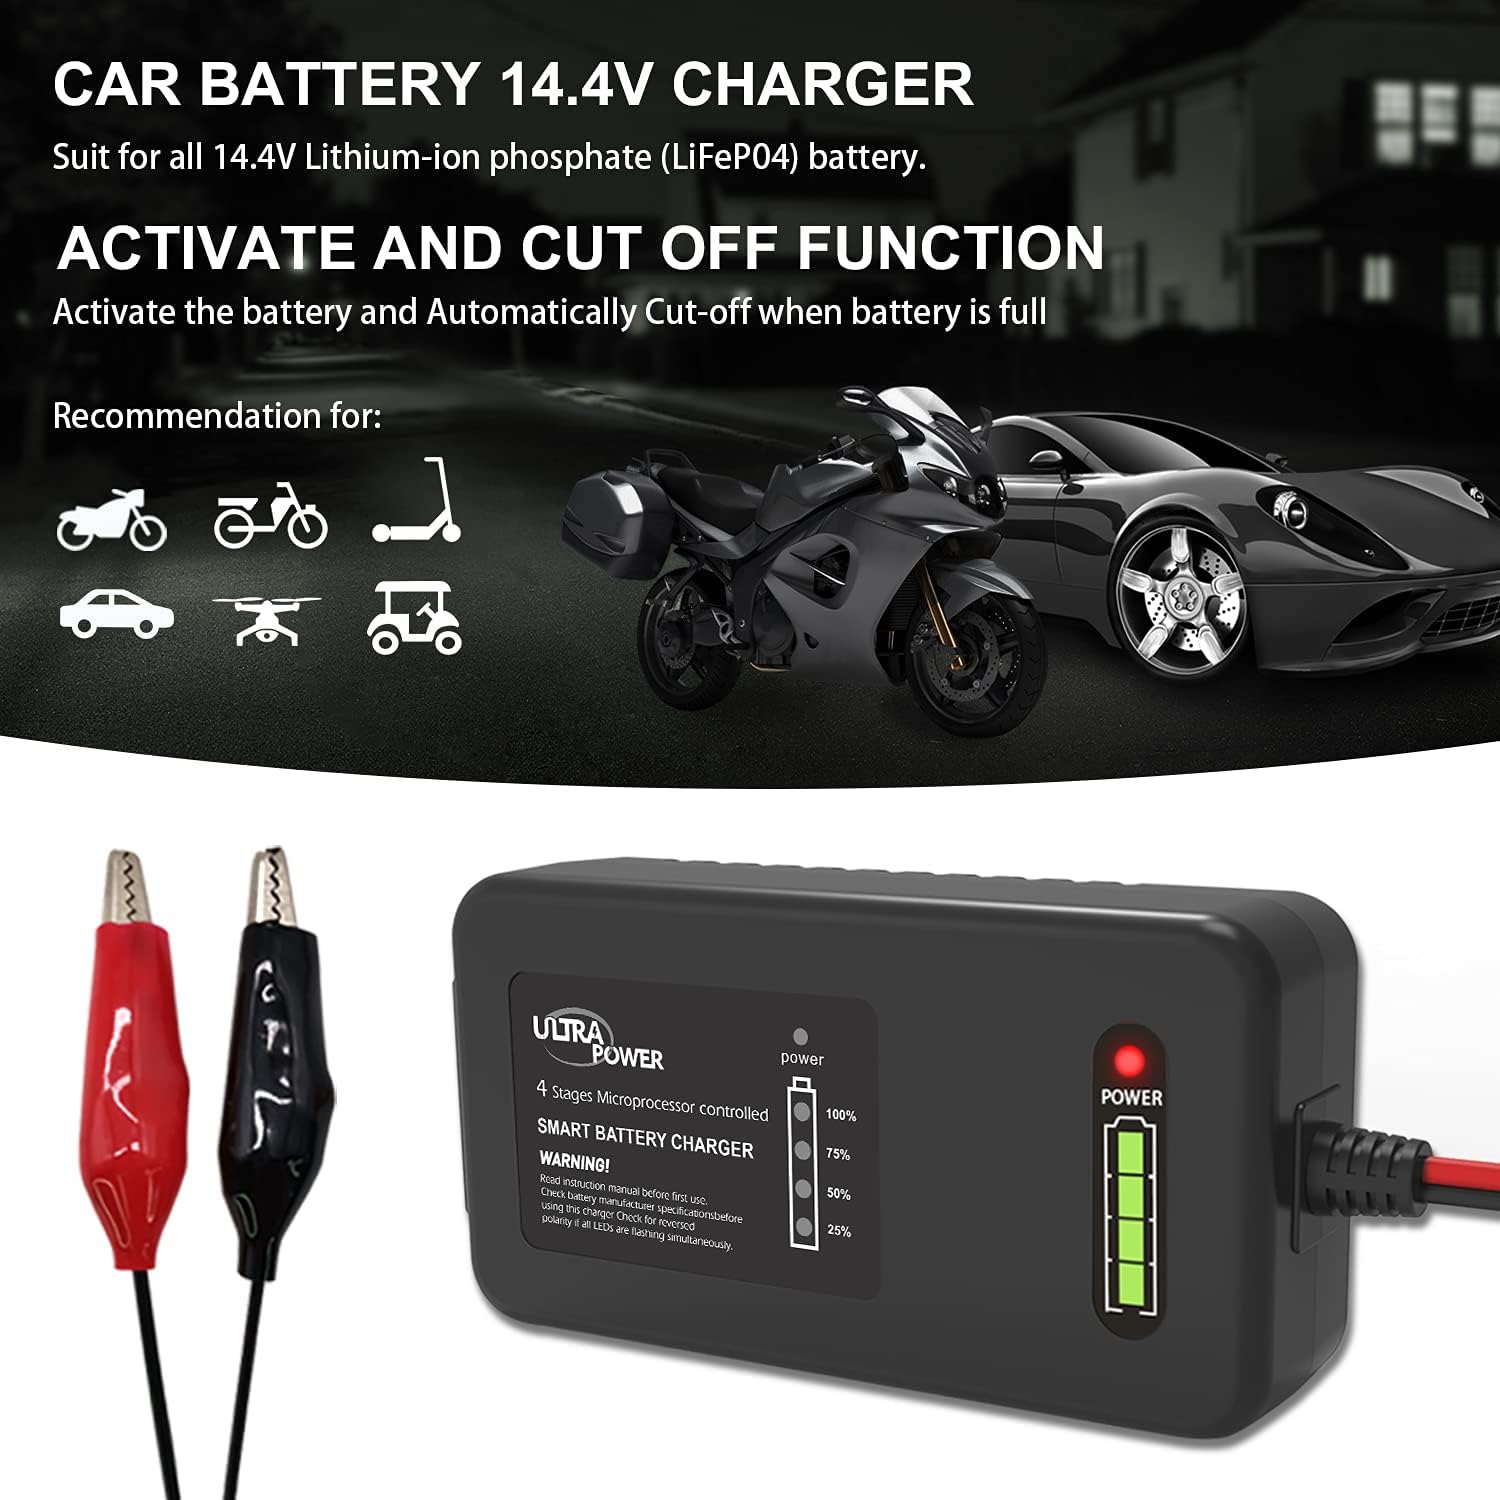 ULTRAPOWER 4-Amp Battery Charger Review